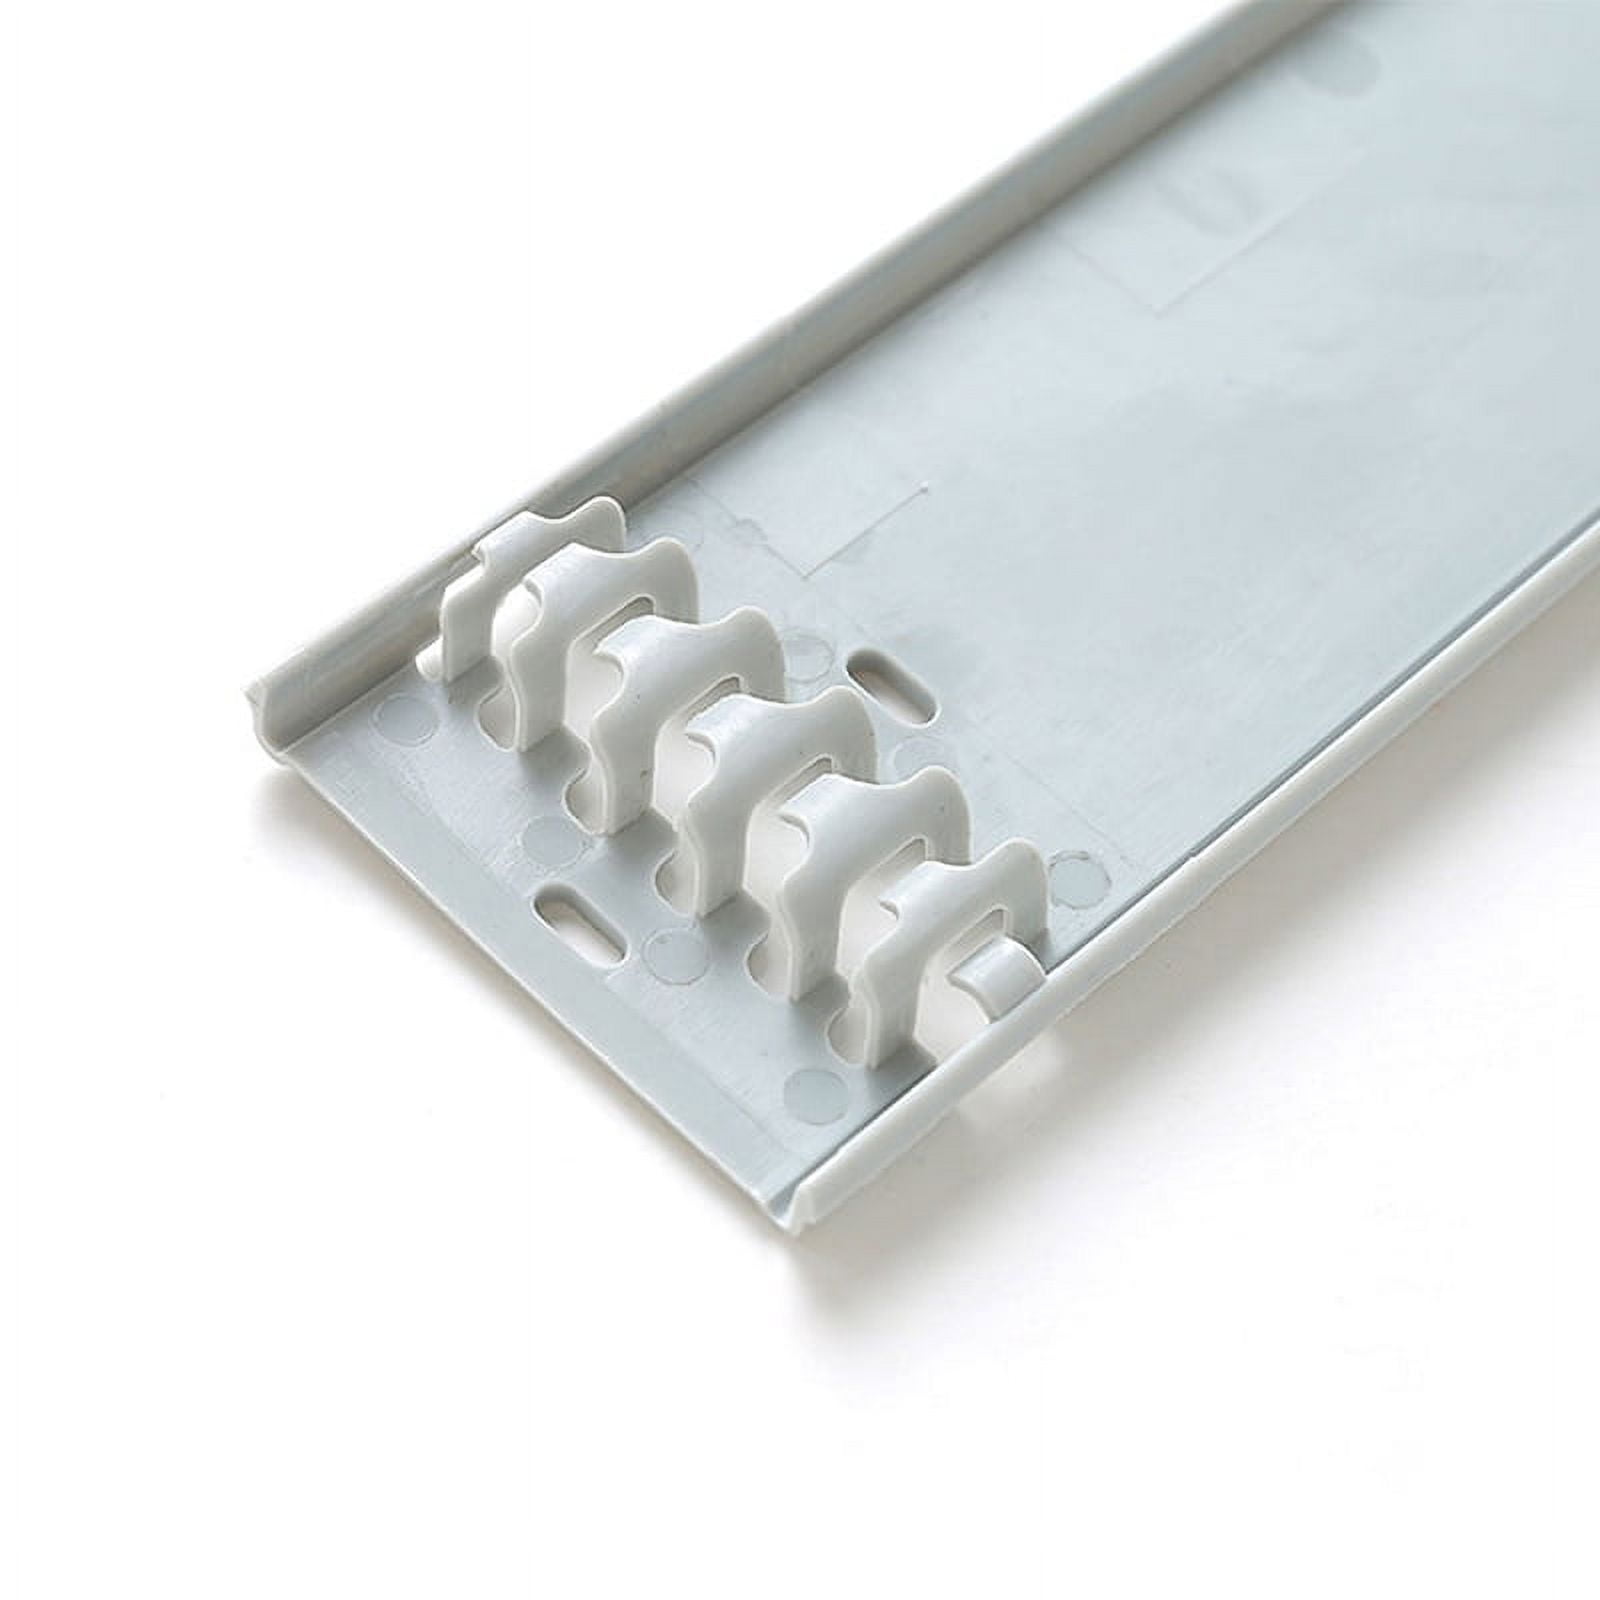 304 Stainless Steel Cable Raceway On-Wall Wire Cover Surface Mount  Electrical Channel To Hide Cable Concealer Floor Cord Cover